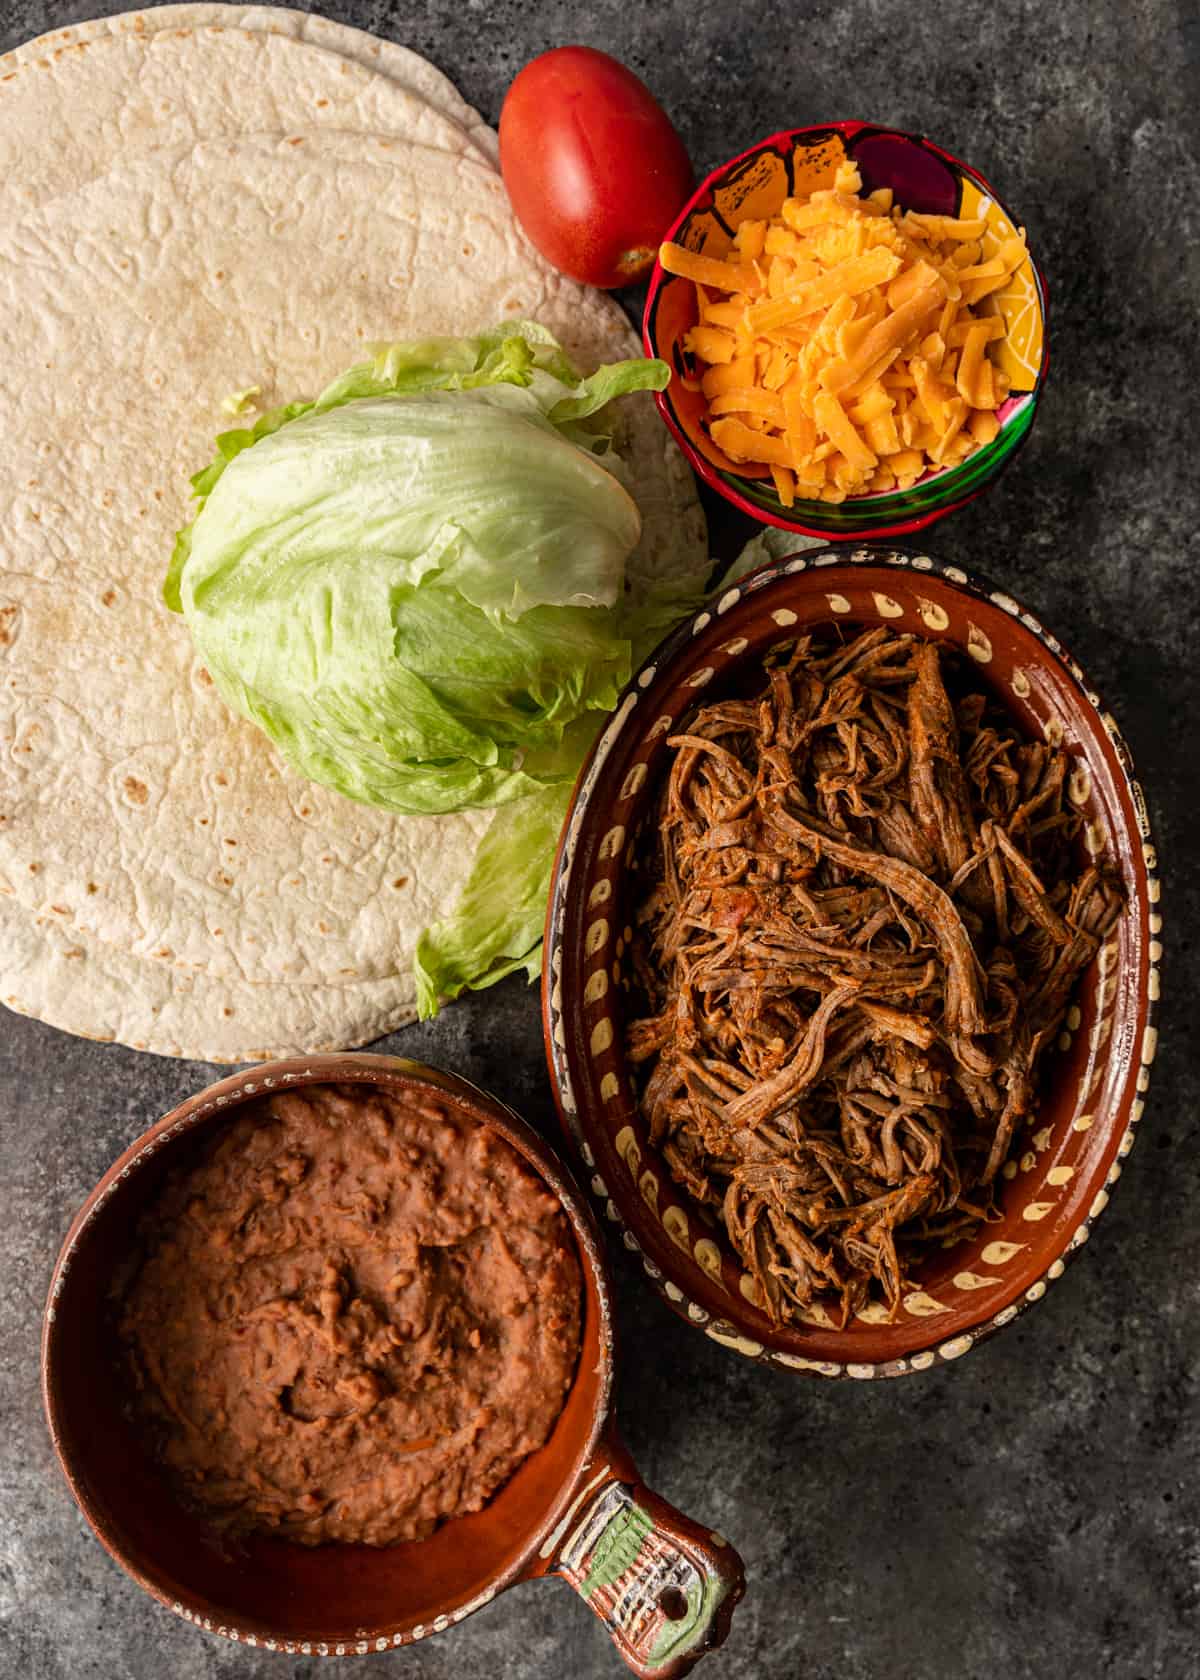 Top view of ingredients needed for shredded beef chimichangas including tortilla, shredded cheese, tomato, beef, refried beans, and lettuce.